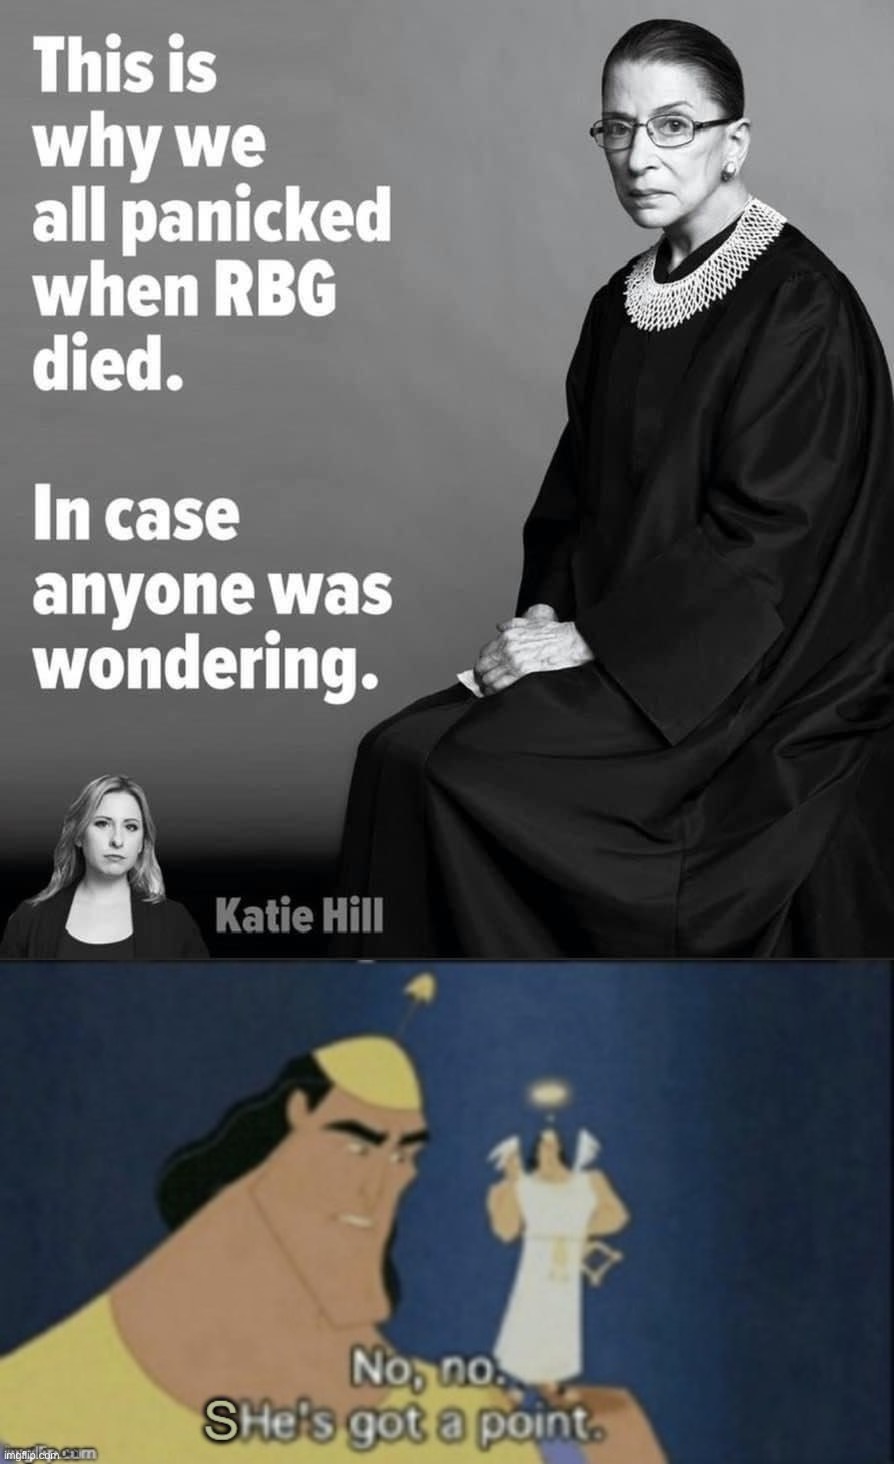 Yes | image tagged in panic after rbg died,no no she's got a point,rbg,ruth bader ginsburg,abortion,supreme court | made w/ Imgflip meme maker